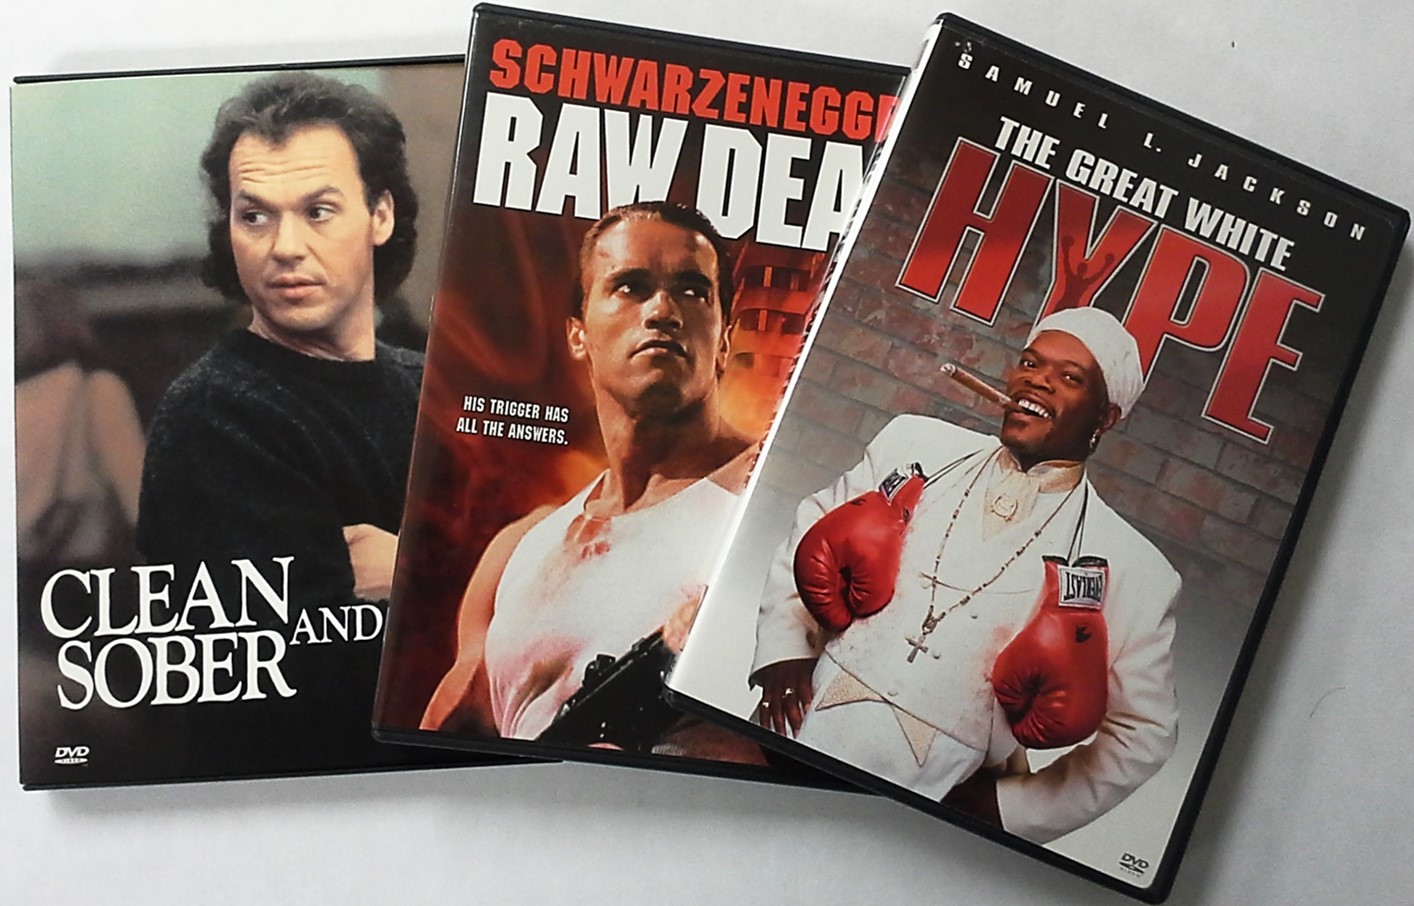 DVD movies new releases such as Clean and Sober, Raw Deal, and The Hype, can be found on a variety of website sites like Moviefone, Rotten Tomatoes, or Metacritic.